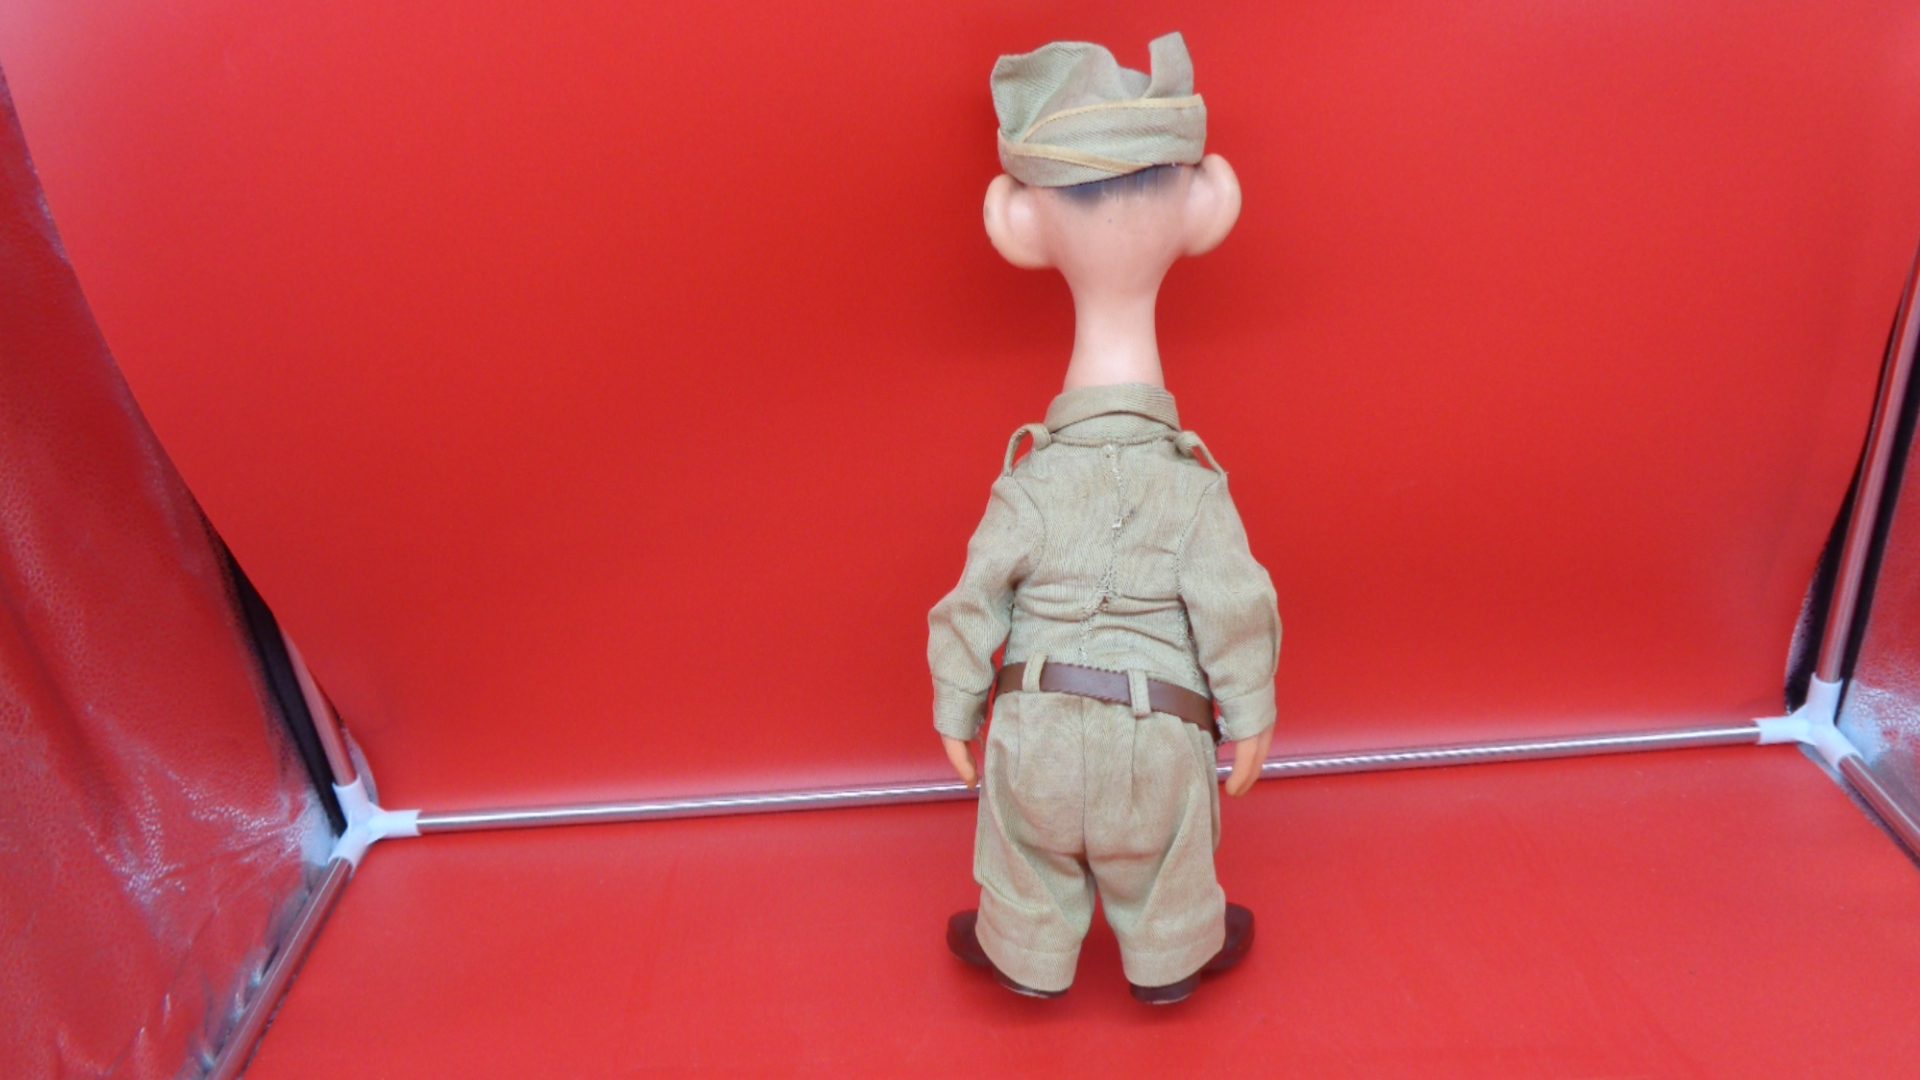 Display of rear view of US Military US Army Sad Sack Doll